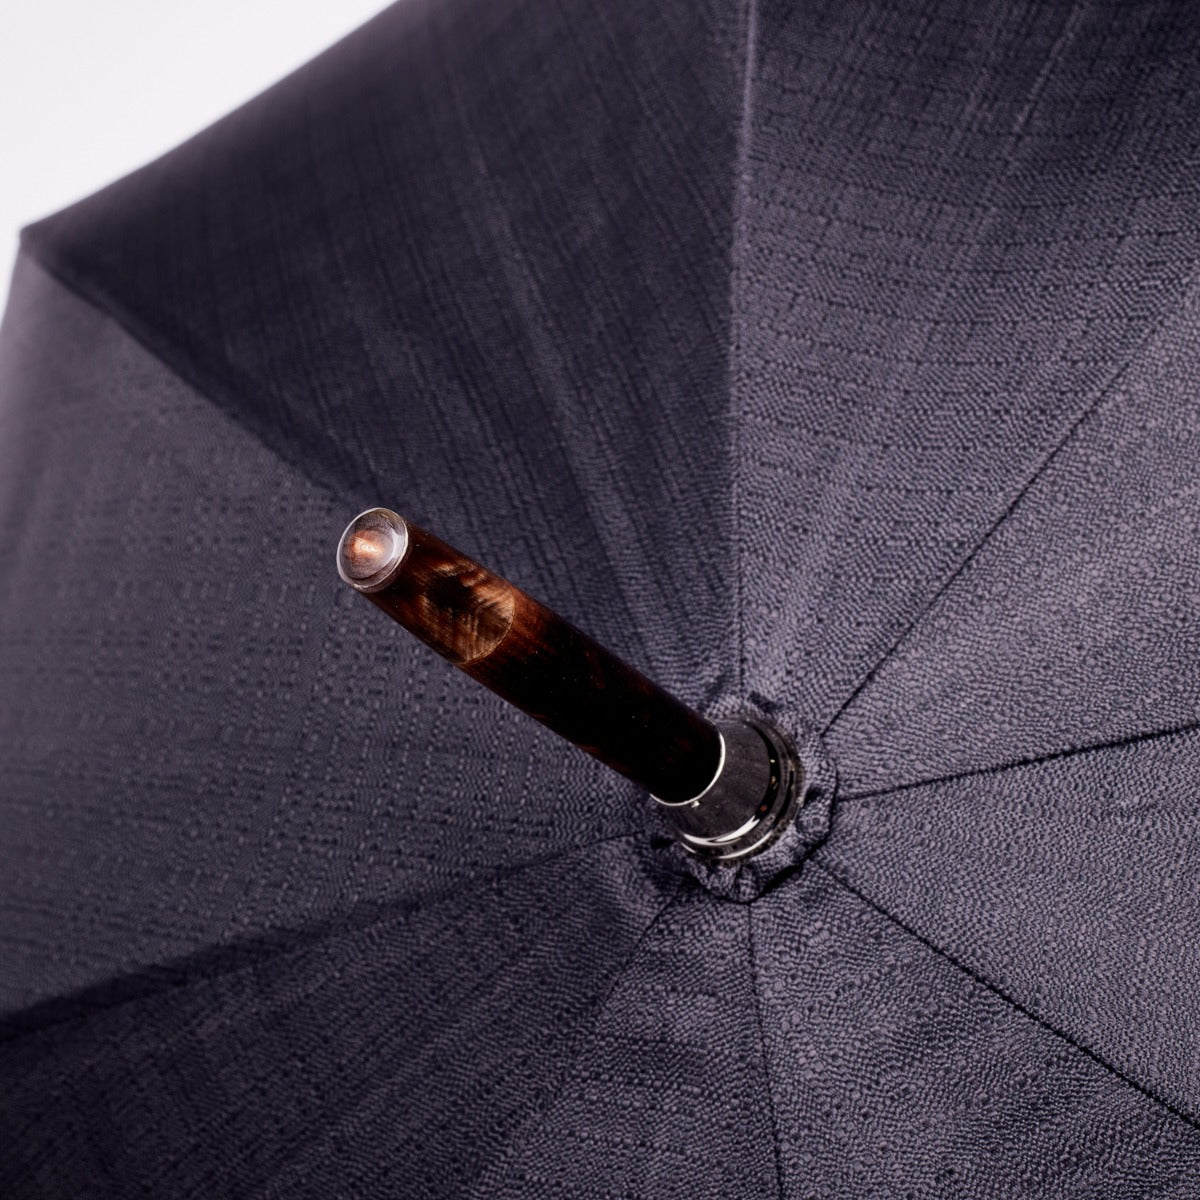 A close up of a Shiny Tiger Maple Handle umbrella with an Imperial Black Canopy, made from Tiger Maplewood by KirbyAllison.com.